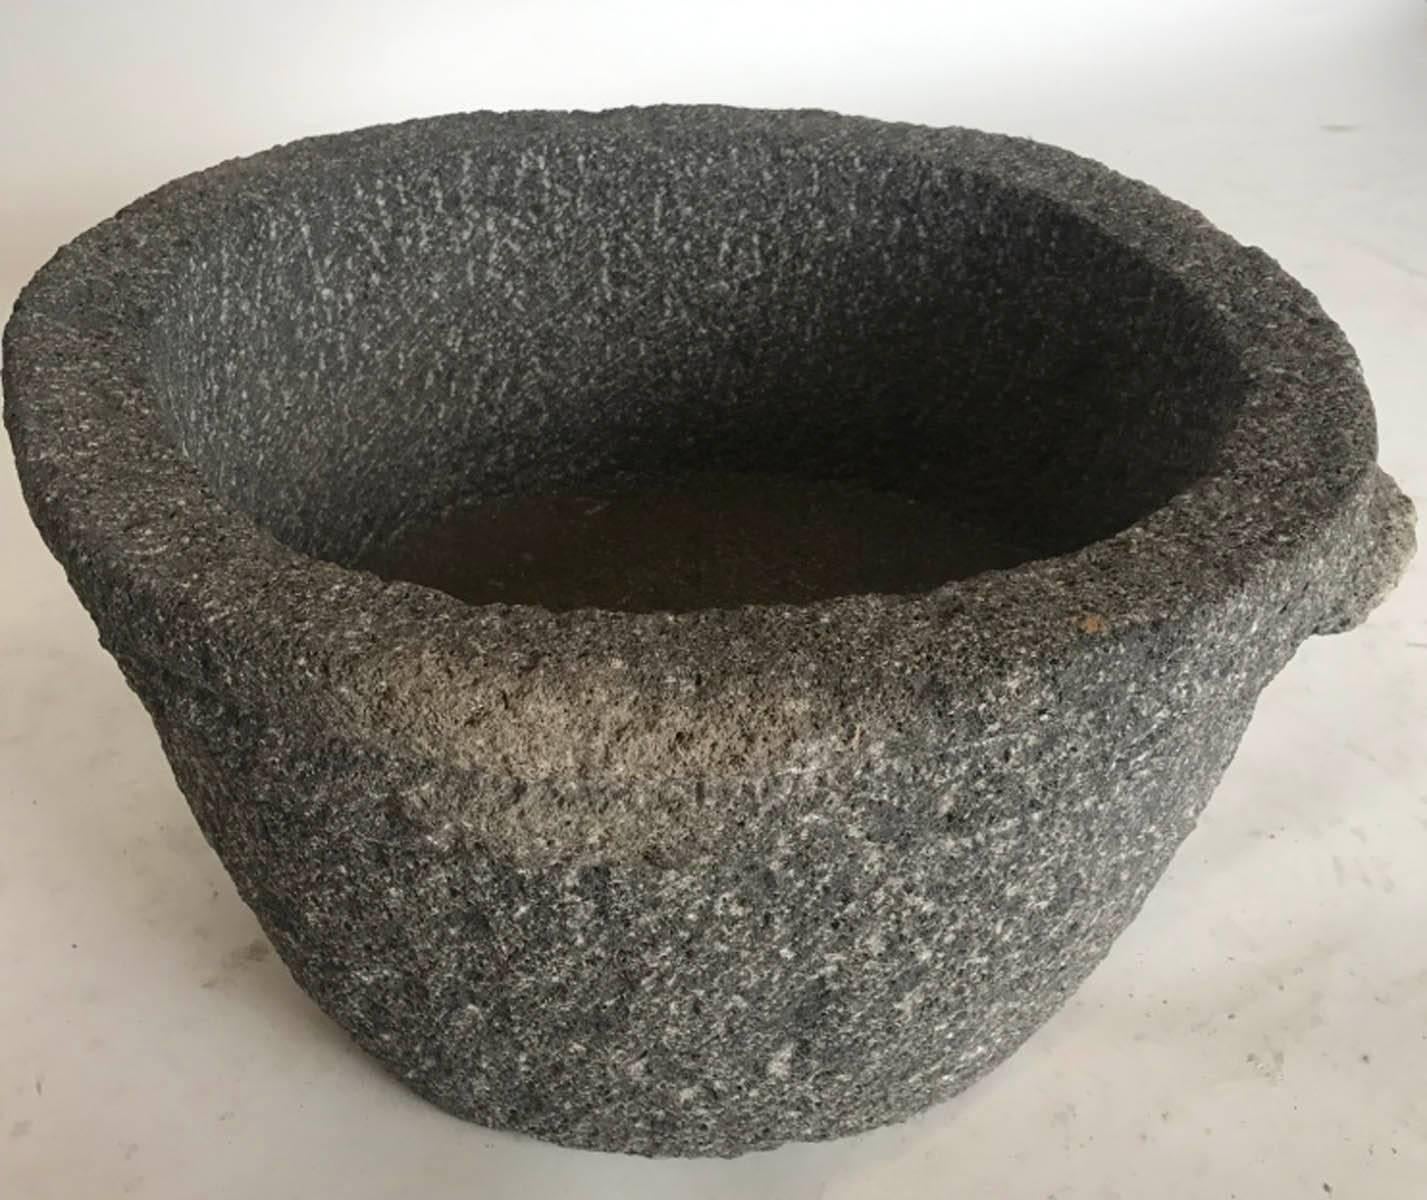 Hand-carved grey toned volcanic rock trough. Interior depth is 17 inches. Carved round double rim and small handles. In good condition.